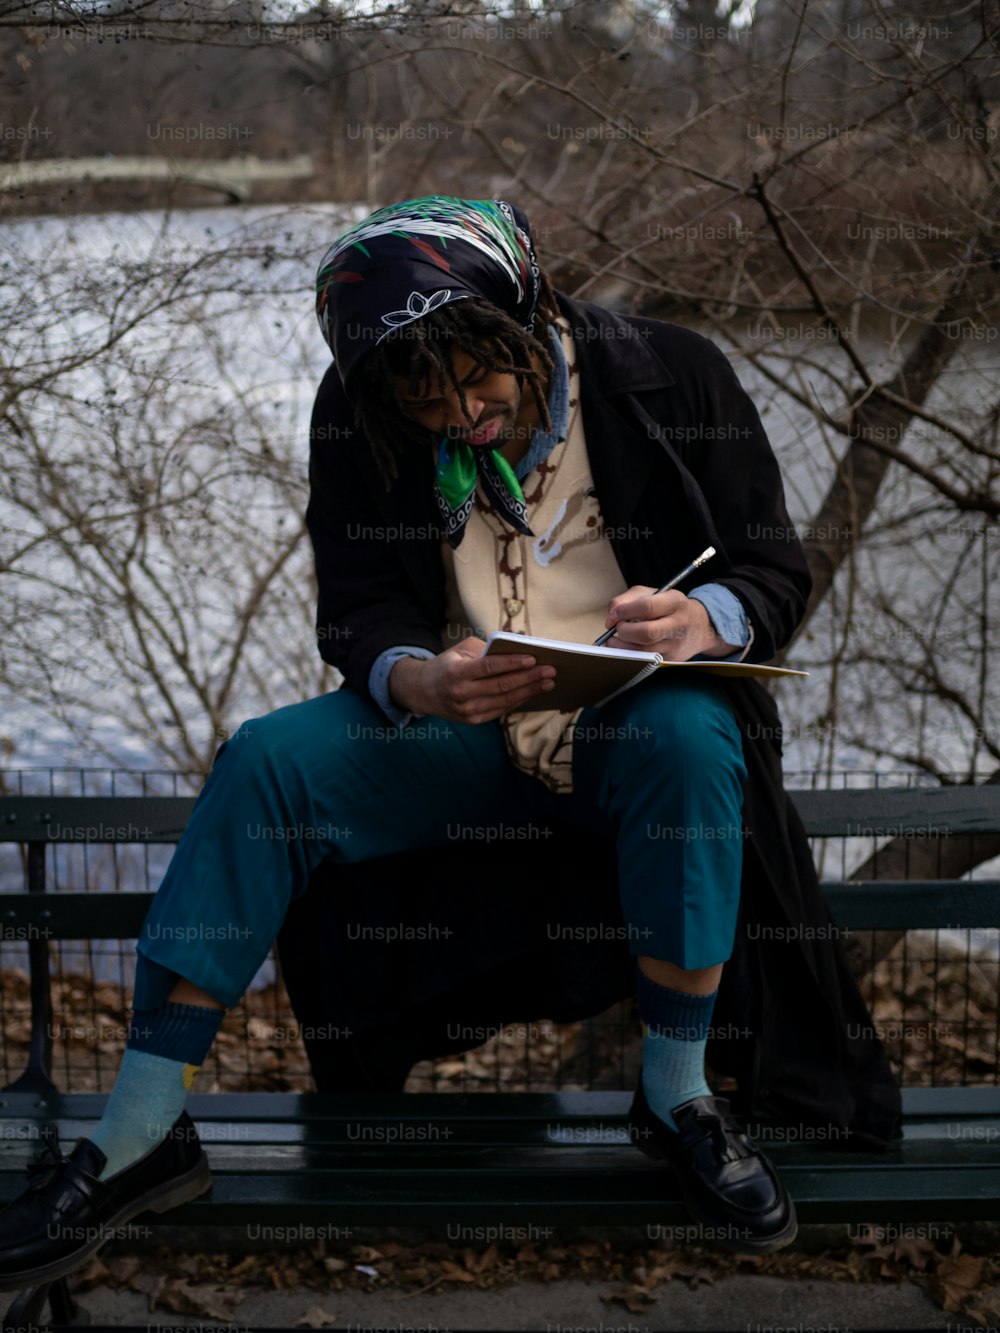 a person sitting on a bench writing on a notebook